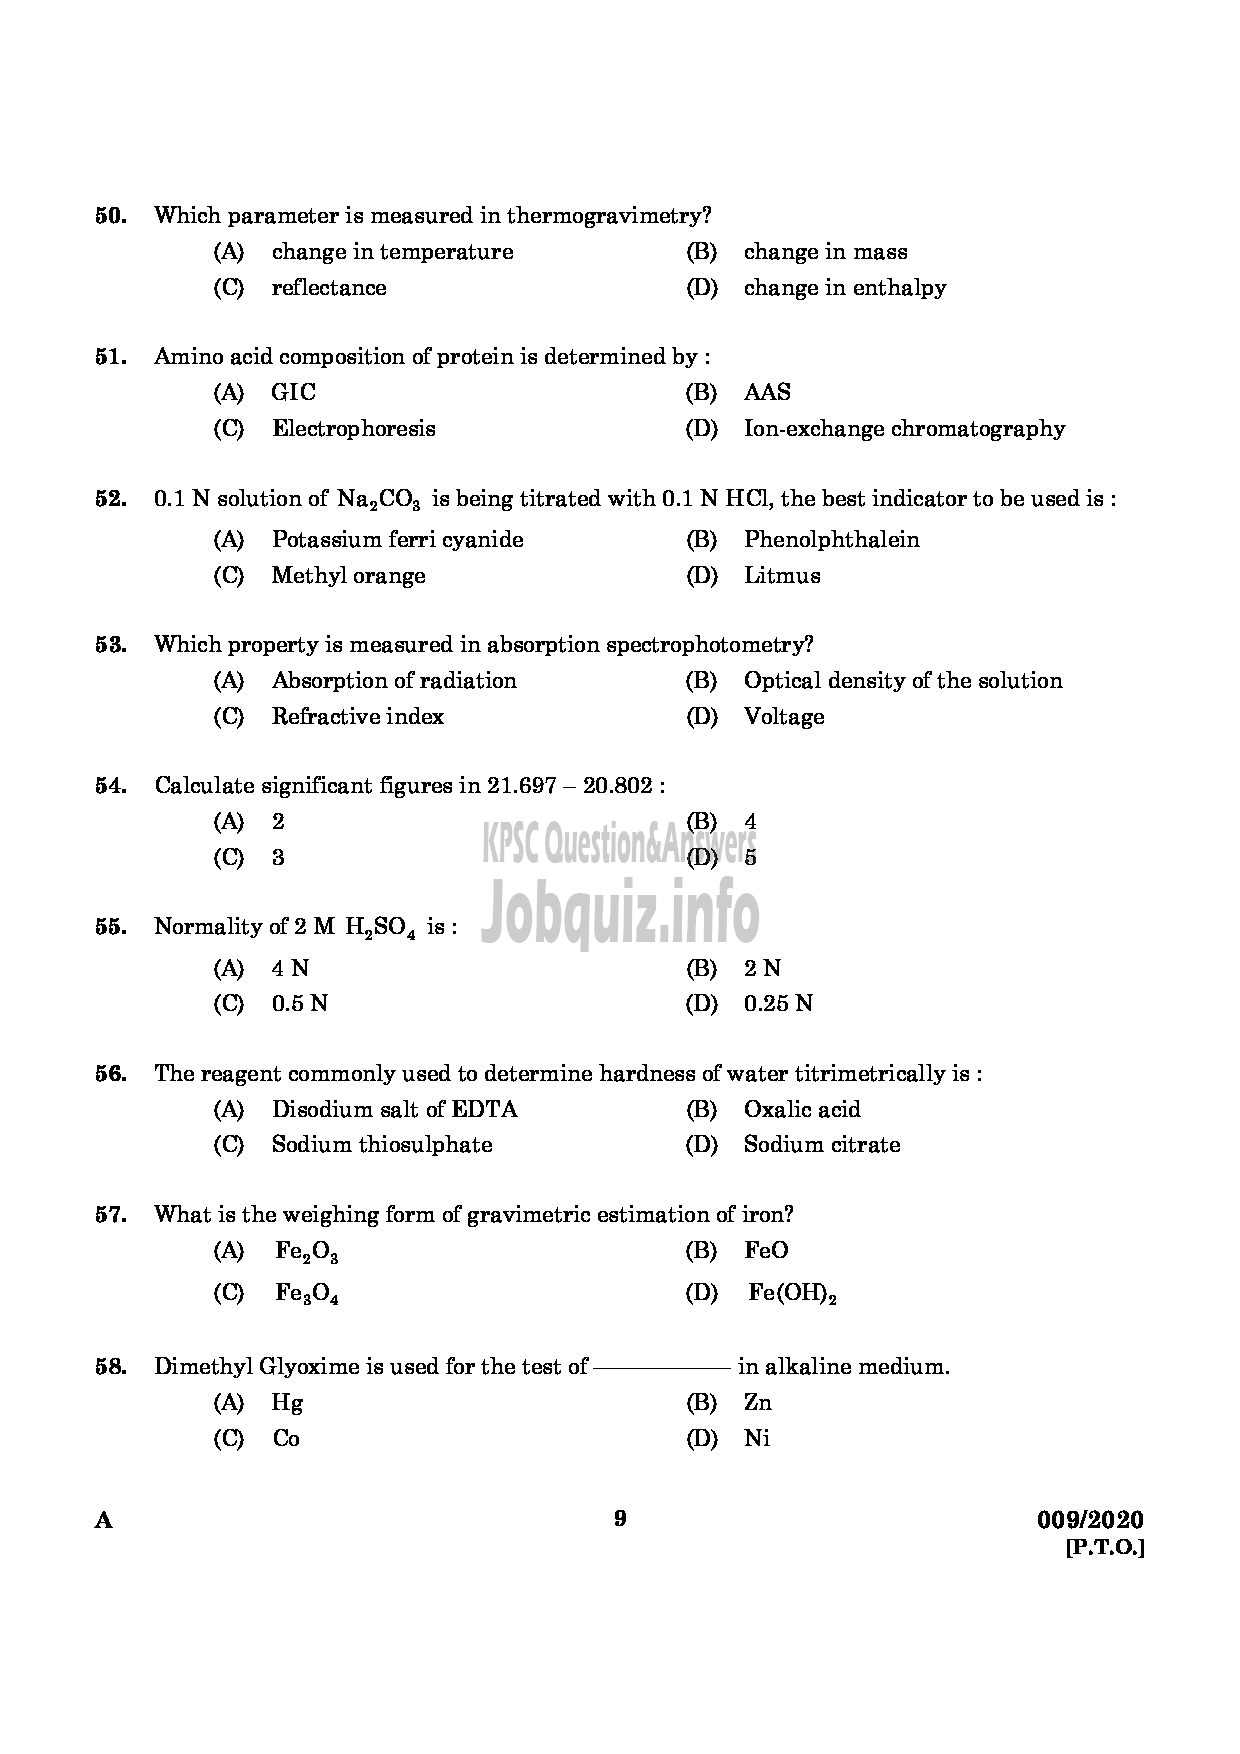 Kerala PSC Question Paper - CHEMIST IN FACTORIES AND BOILERS ENGLISH -7